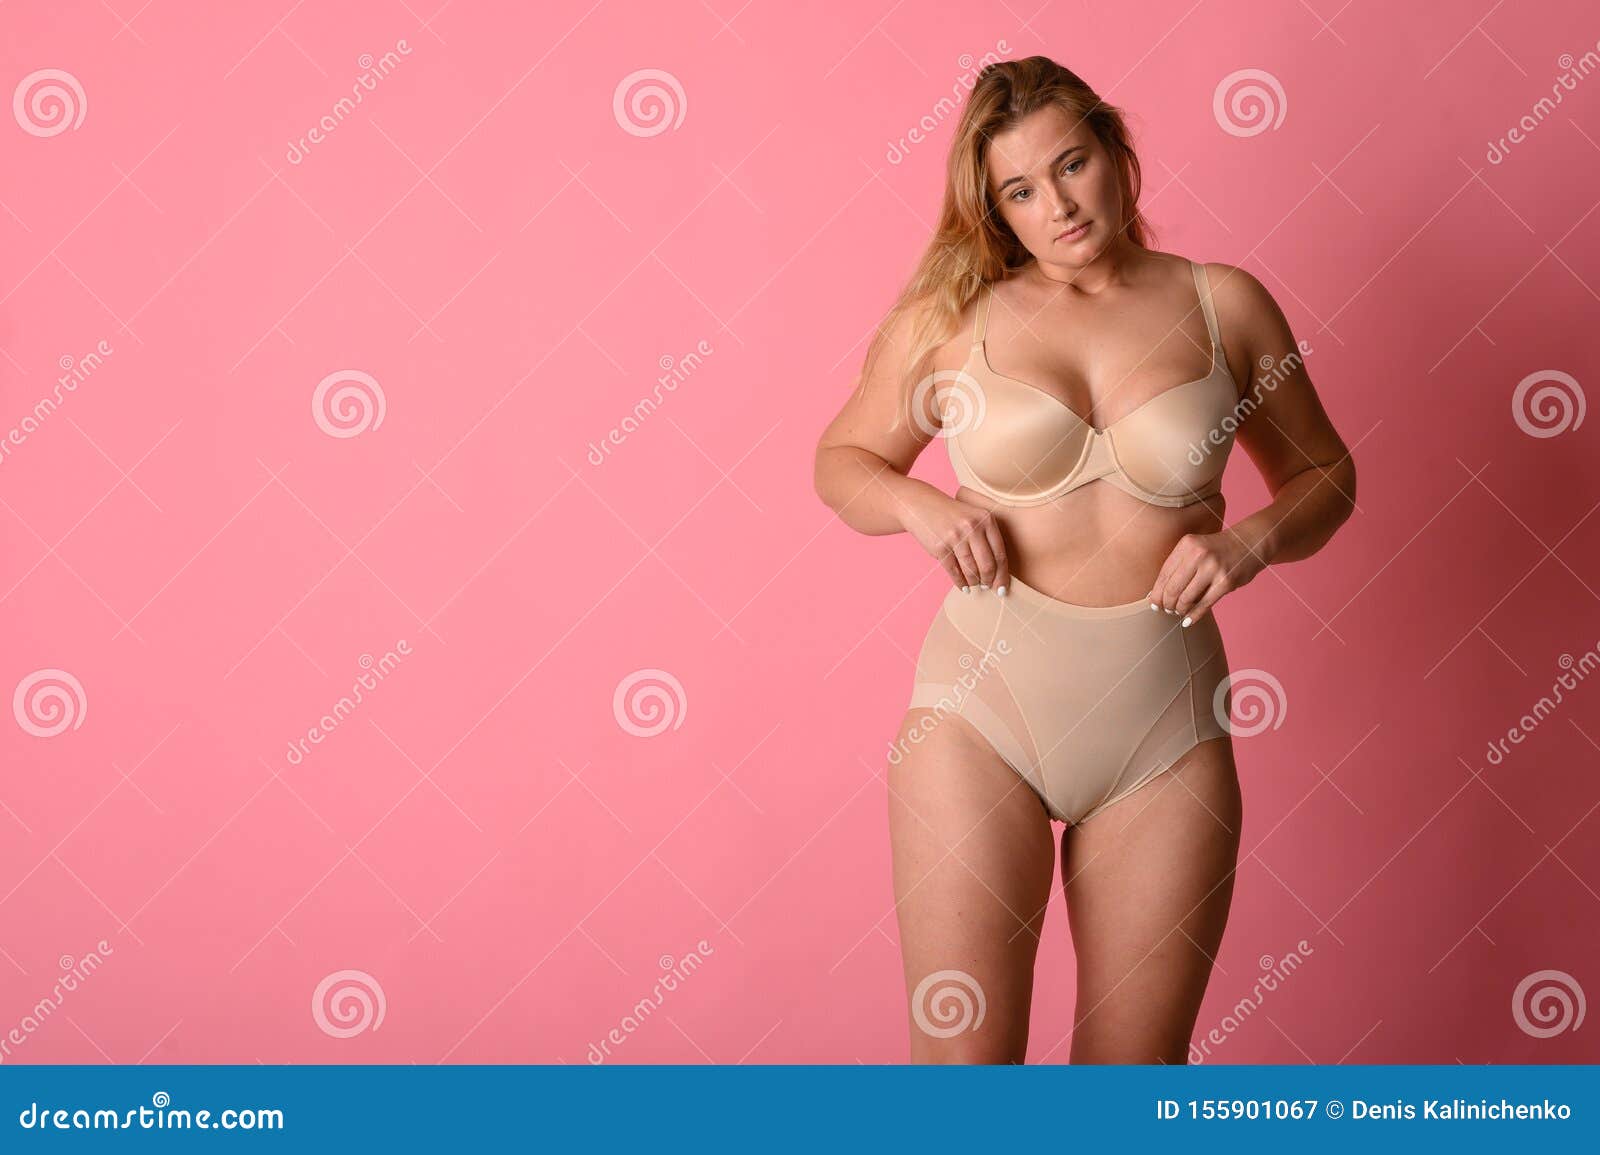 68 Chubby Wanna Stock Photos, Images & Pictures